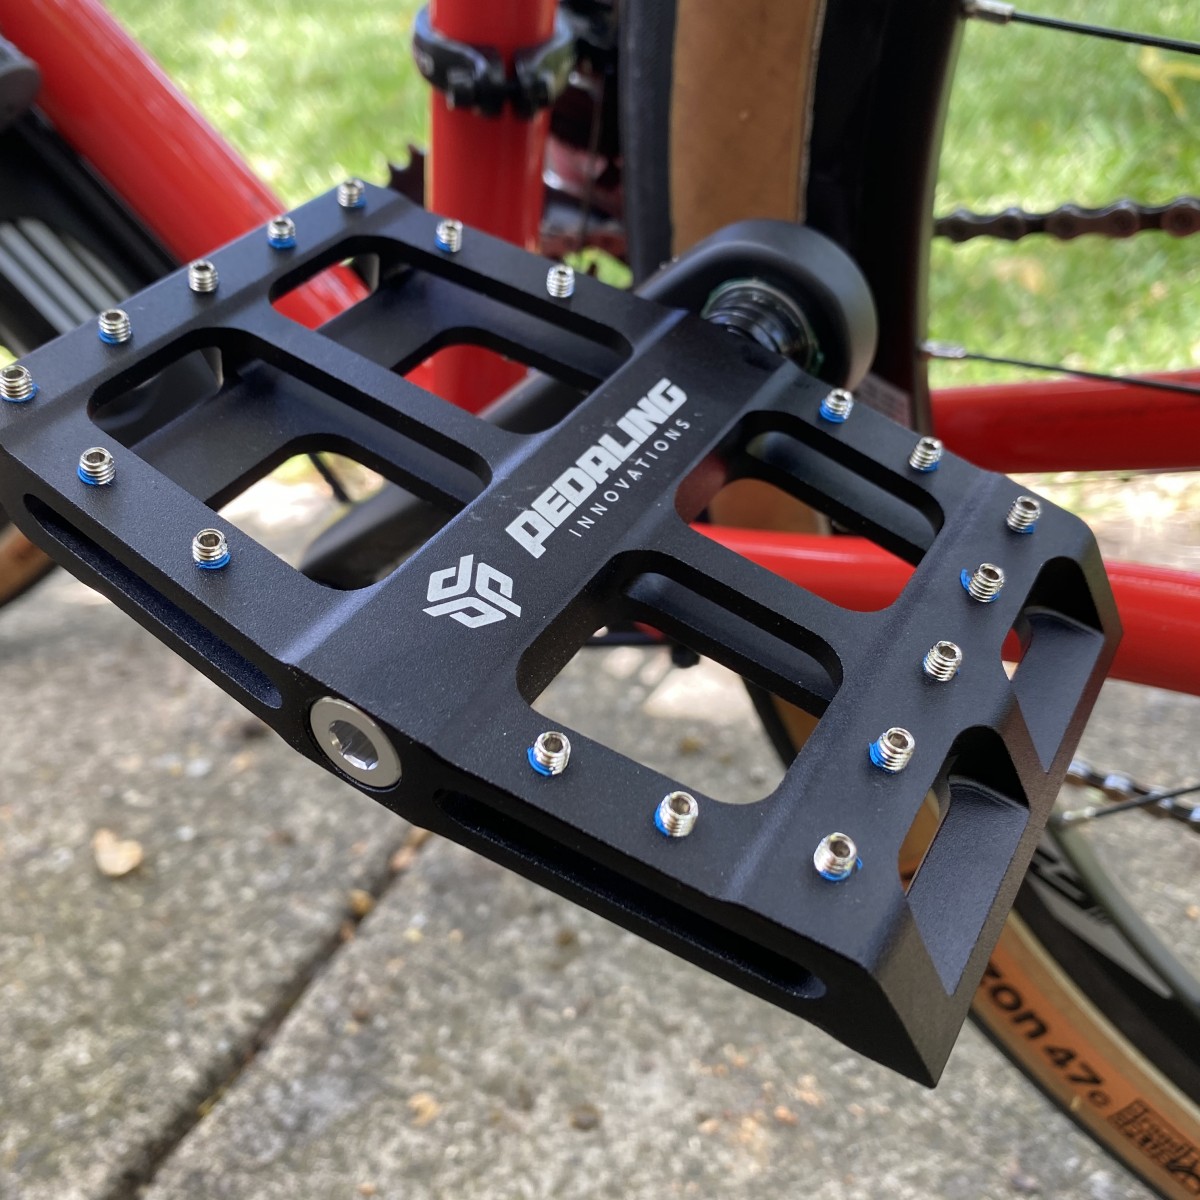 hoe vaak Opsplitsen Automatisch Switching From Clipless to Flat Pedals for Gravel Riding | VeloNut